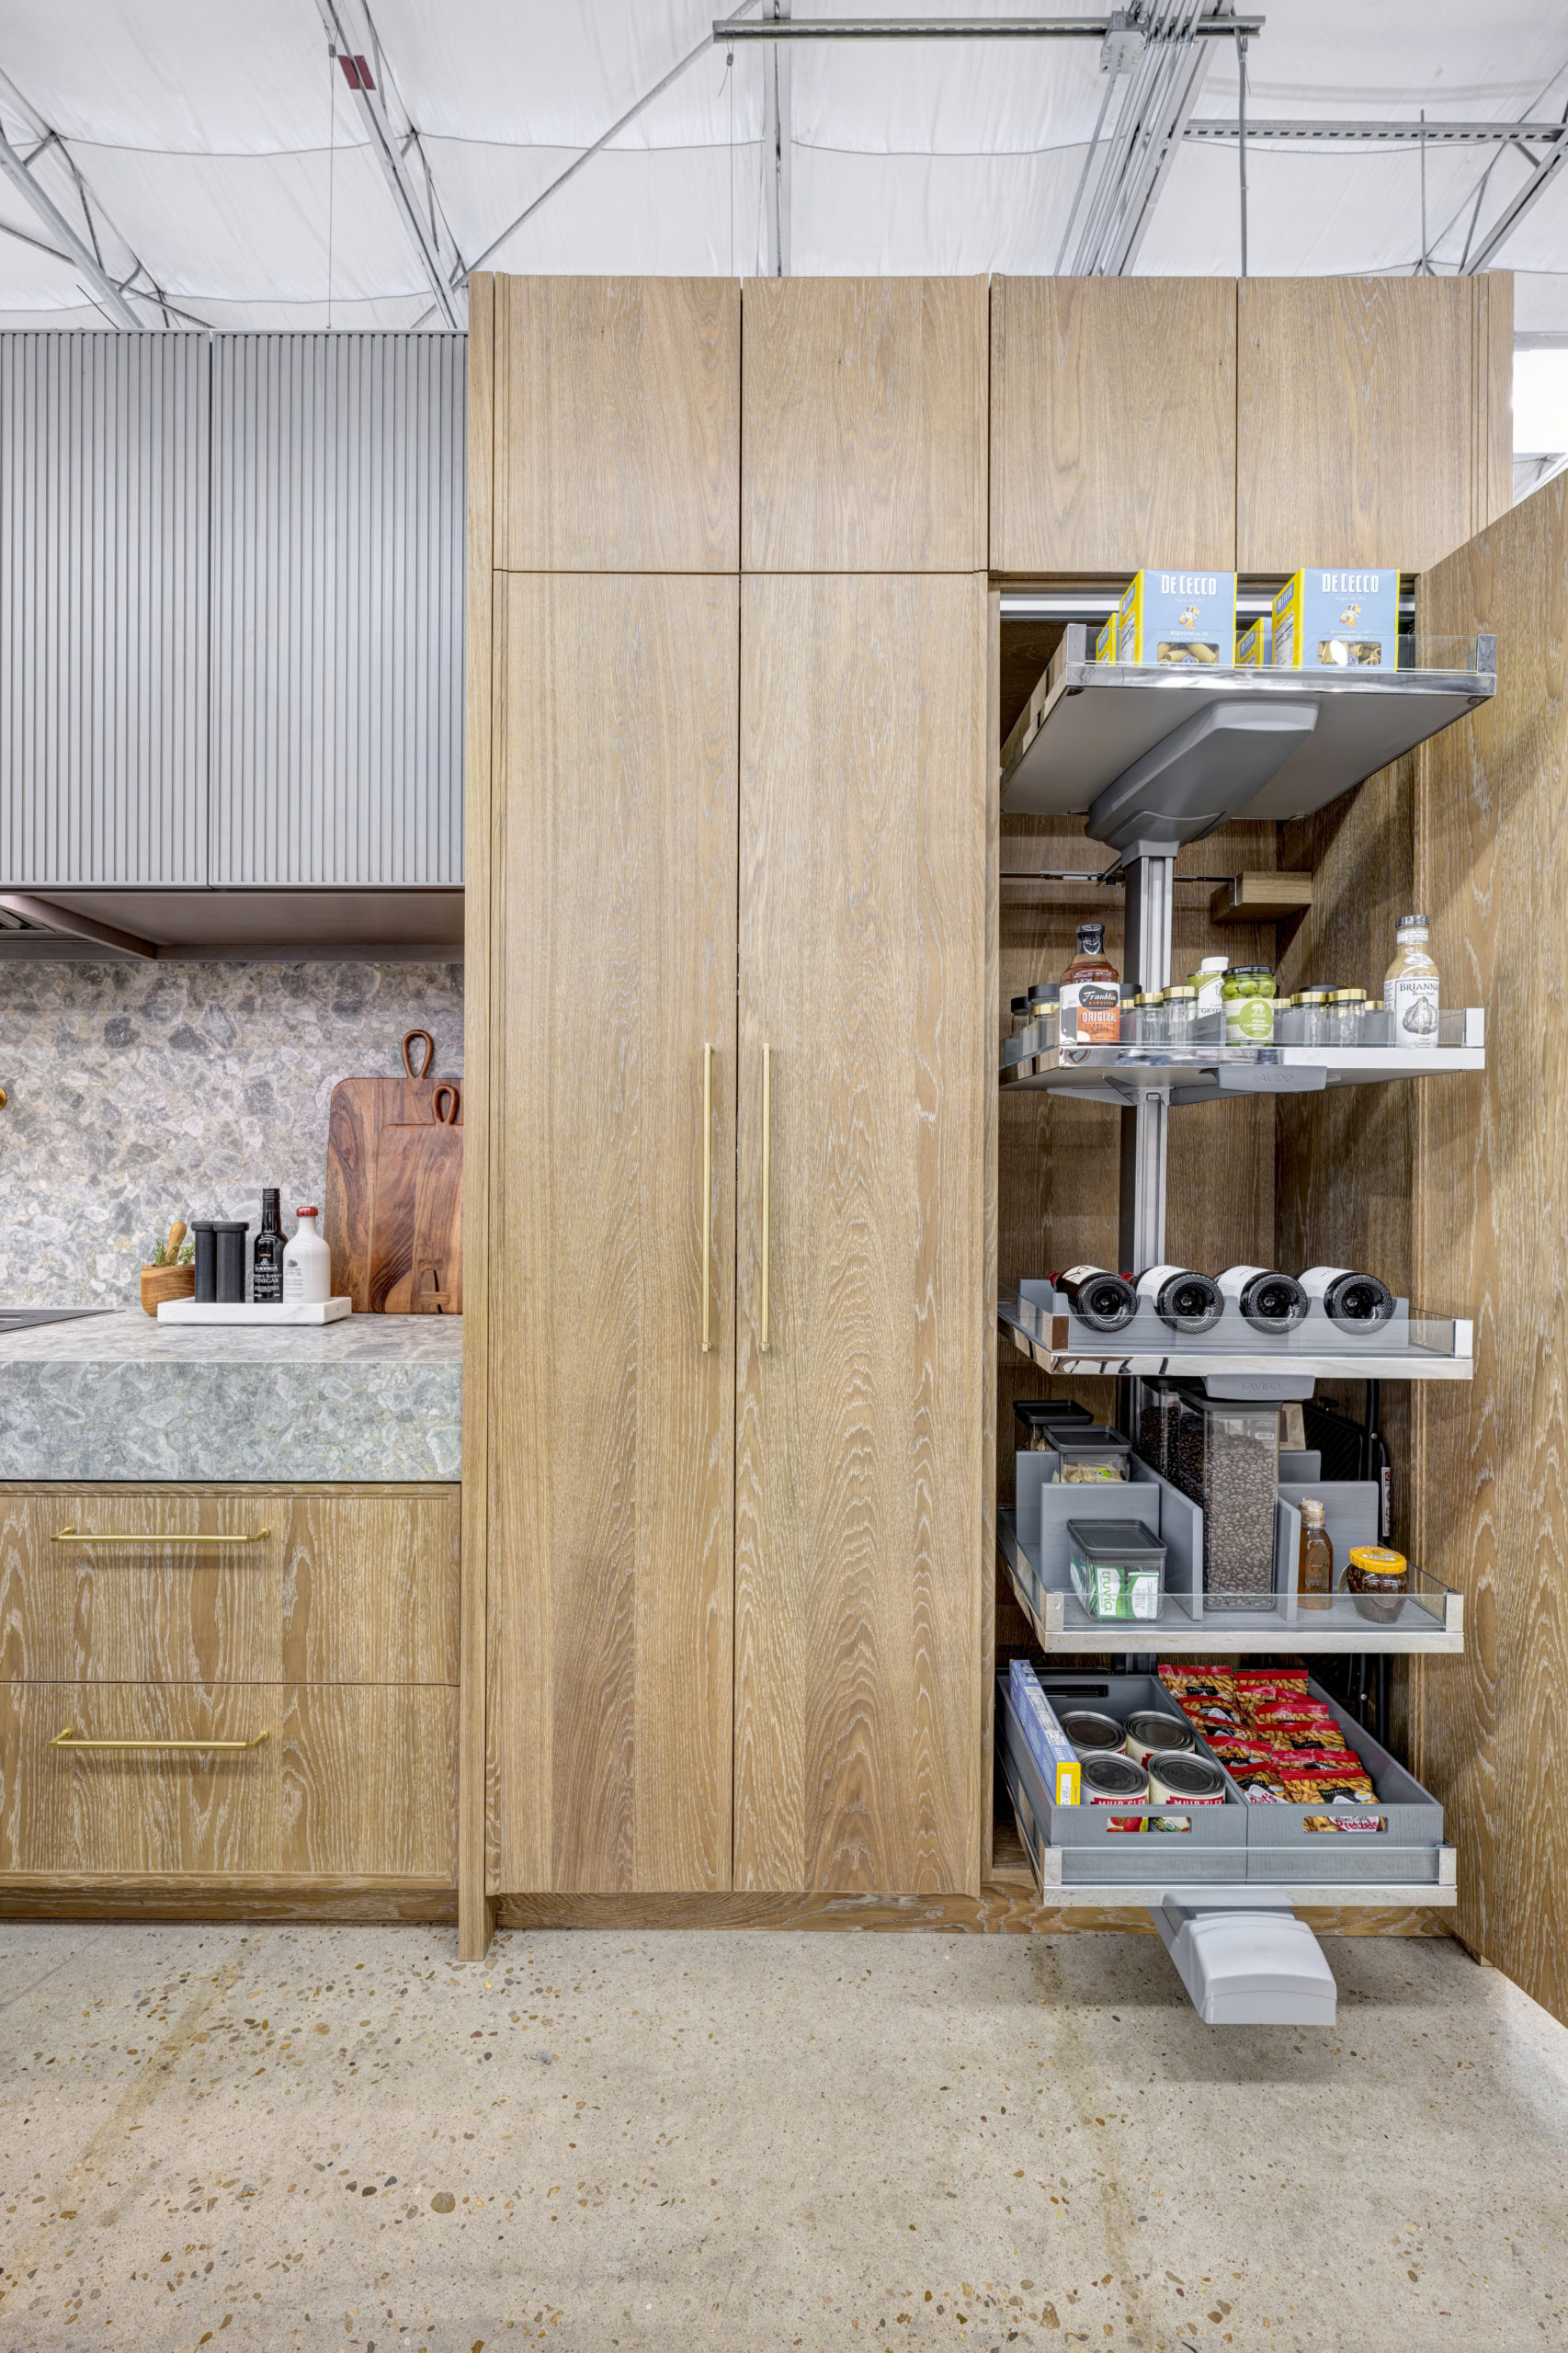 Built in kitchen cabinet provide extra storage